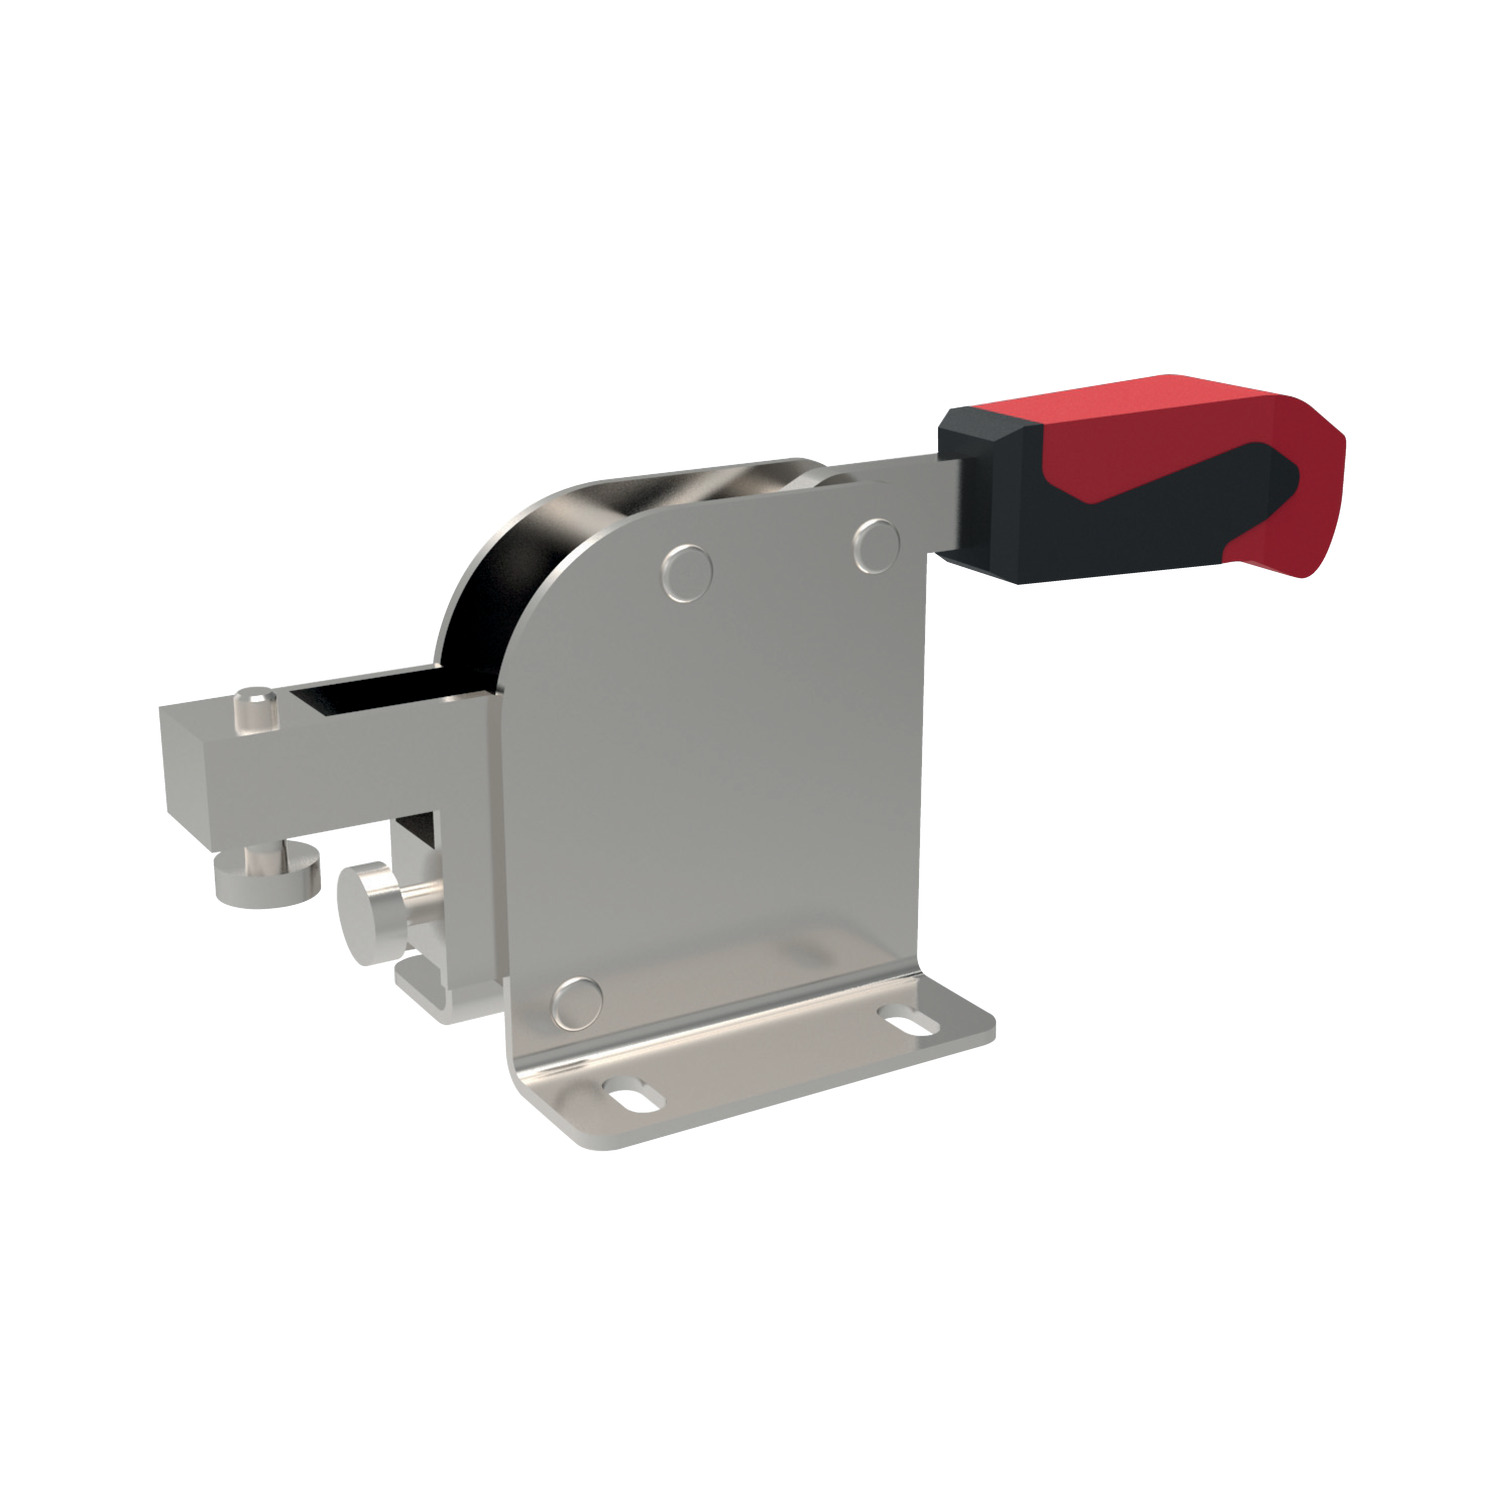 42500.W0001 Push-Pull Type Toggle Clamp 1,0 - 1,0 - 17,0 - 33